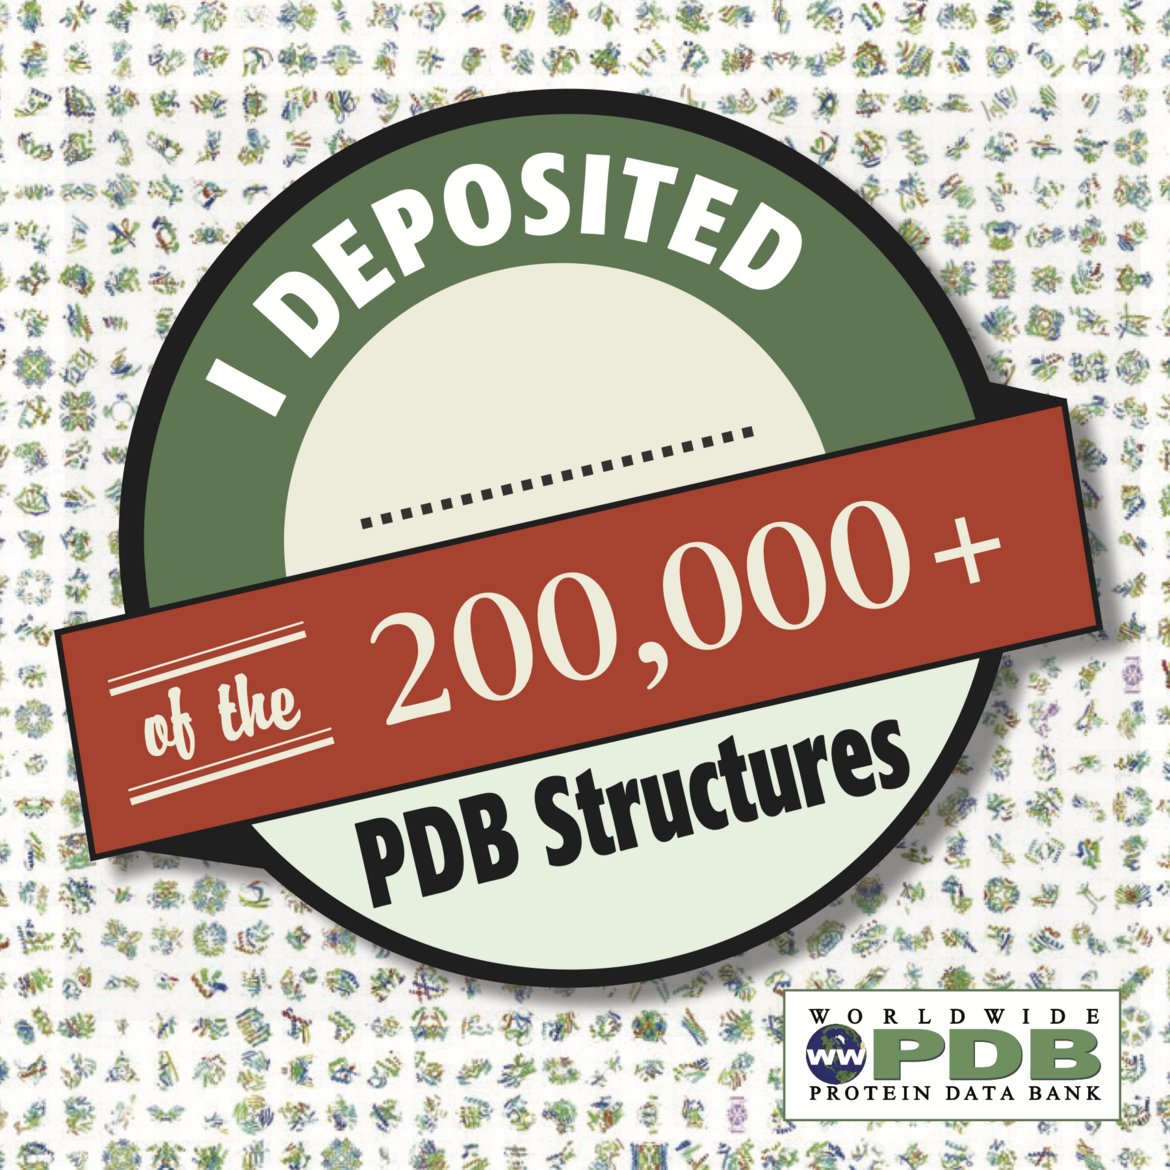 Depositors: Download this image, write the number of structures deposited, and tag us in your photos